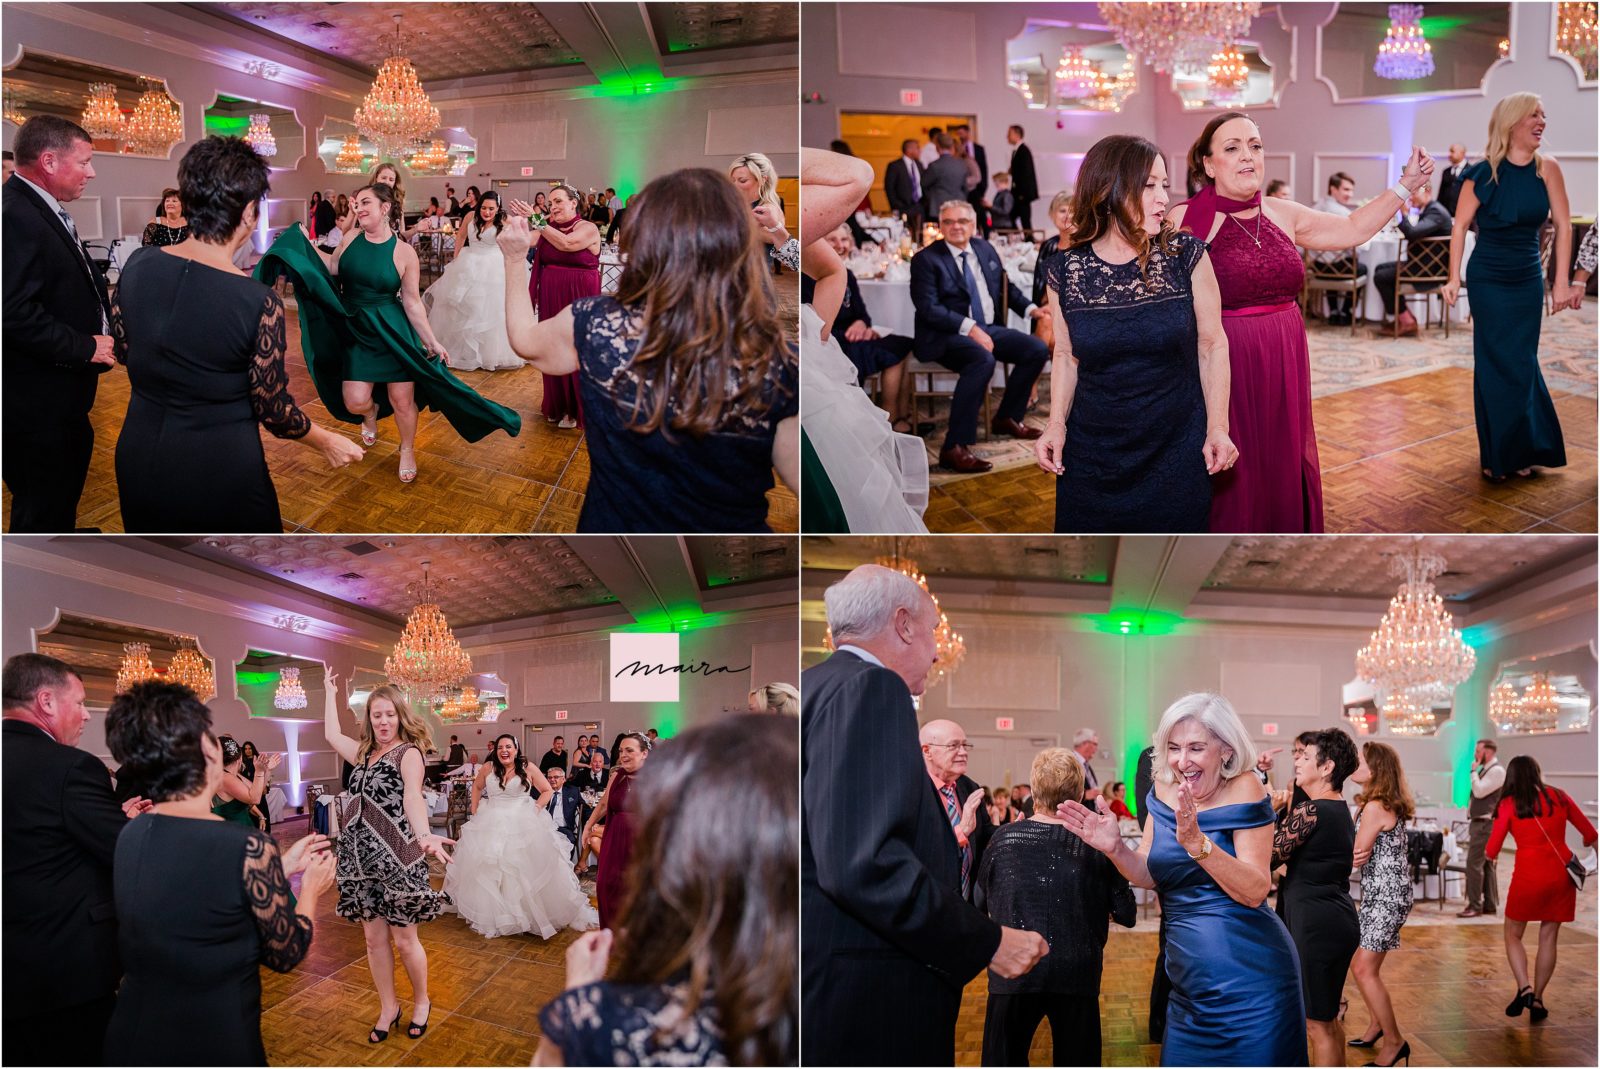 Oakbrook wedding in Drury Lane ,Venue, Reception Hall, Bride and Groom, guests family and friends dancing dance floor party dj